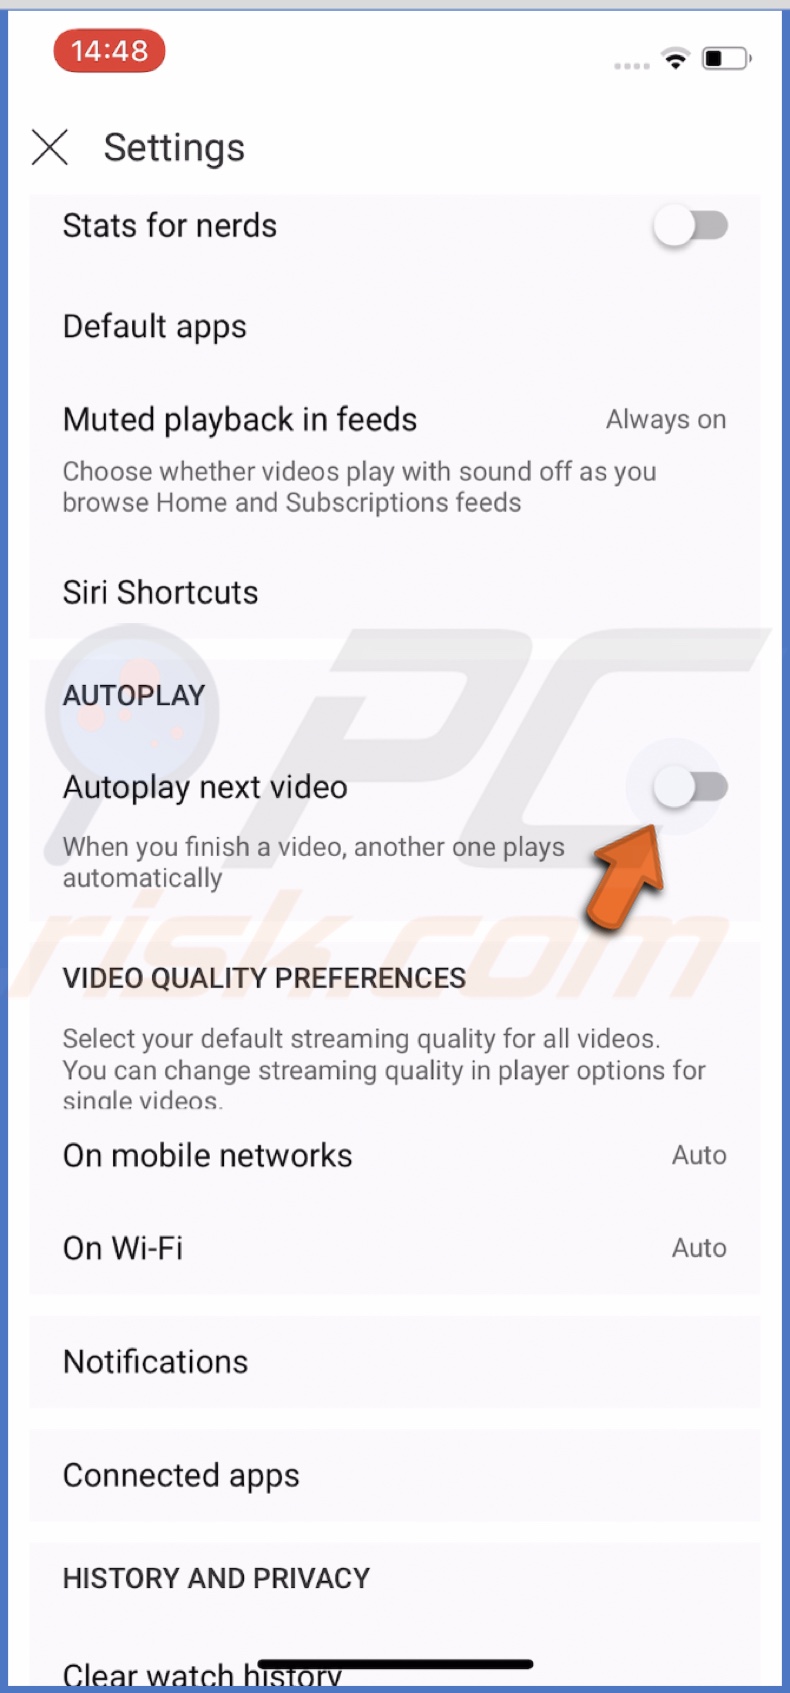 Disable Autoplay next video in Youtube